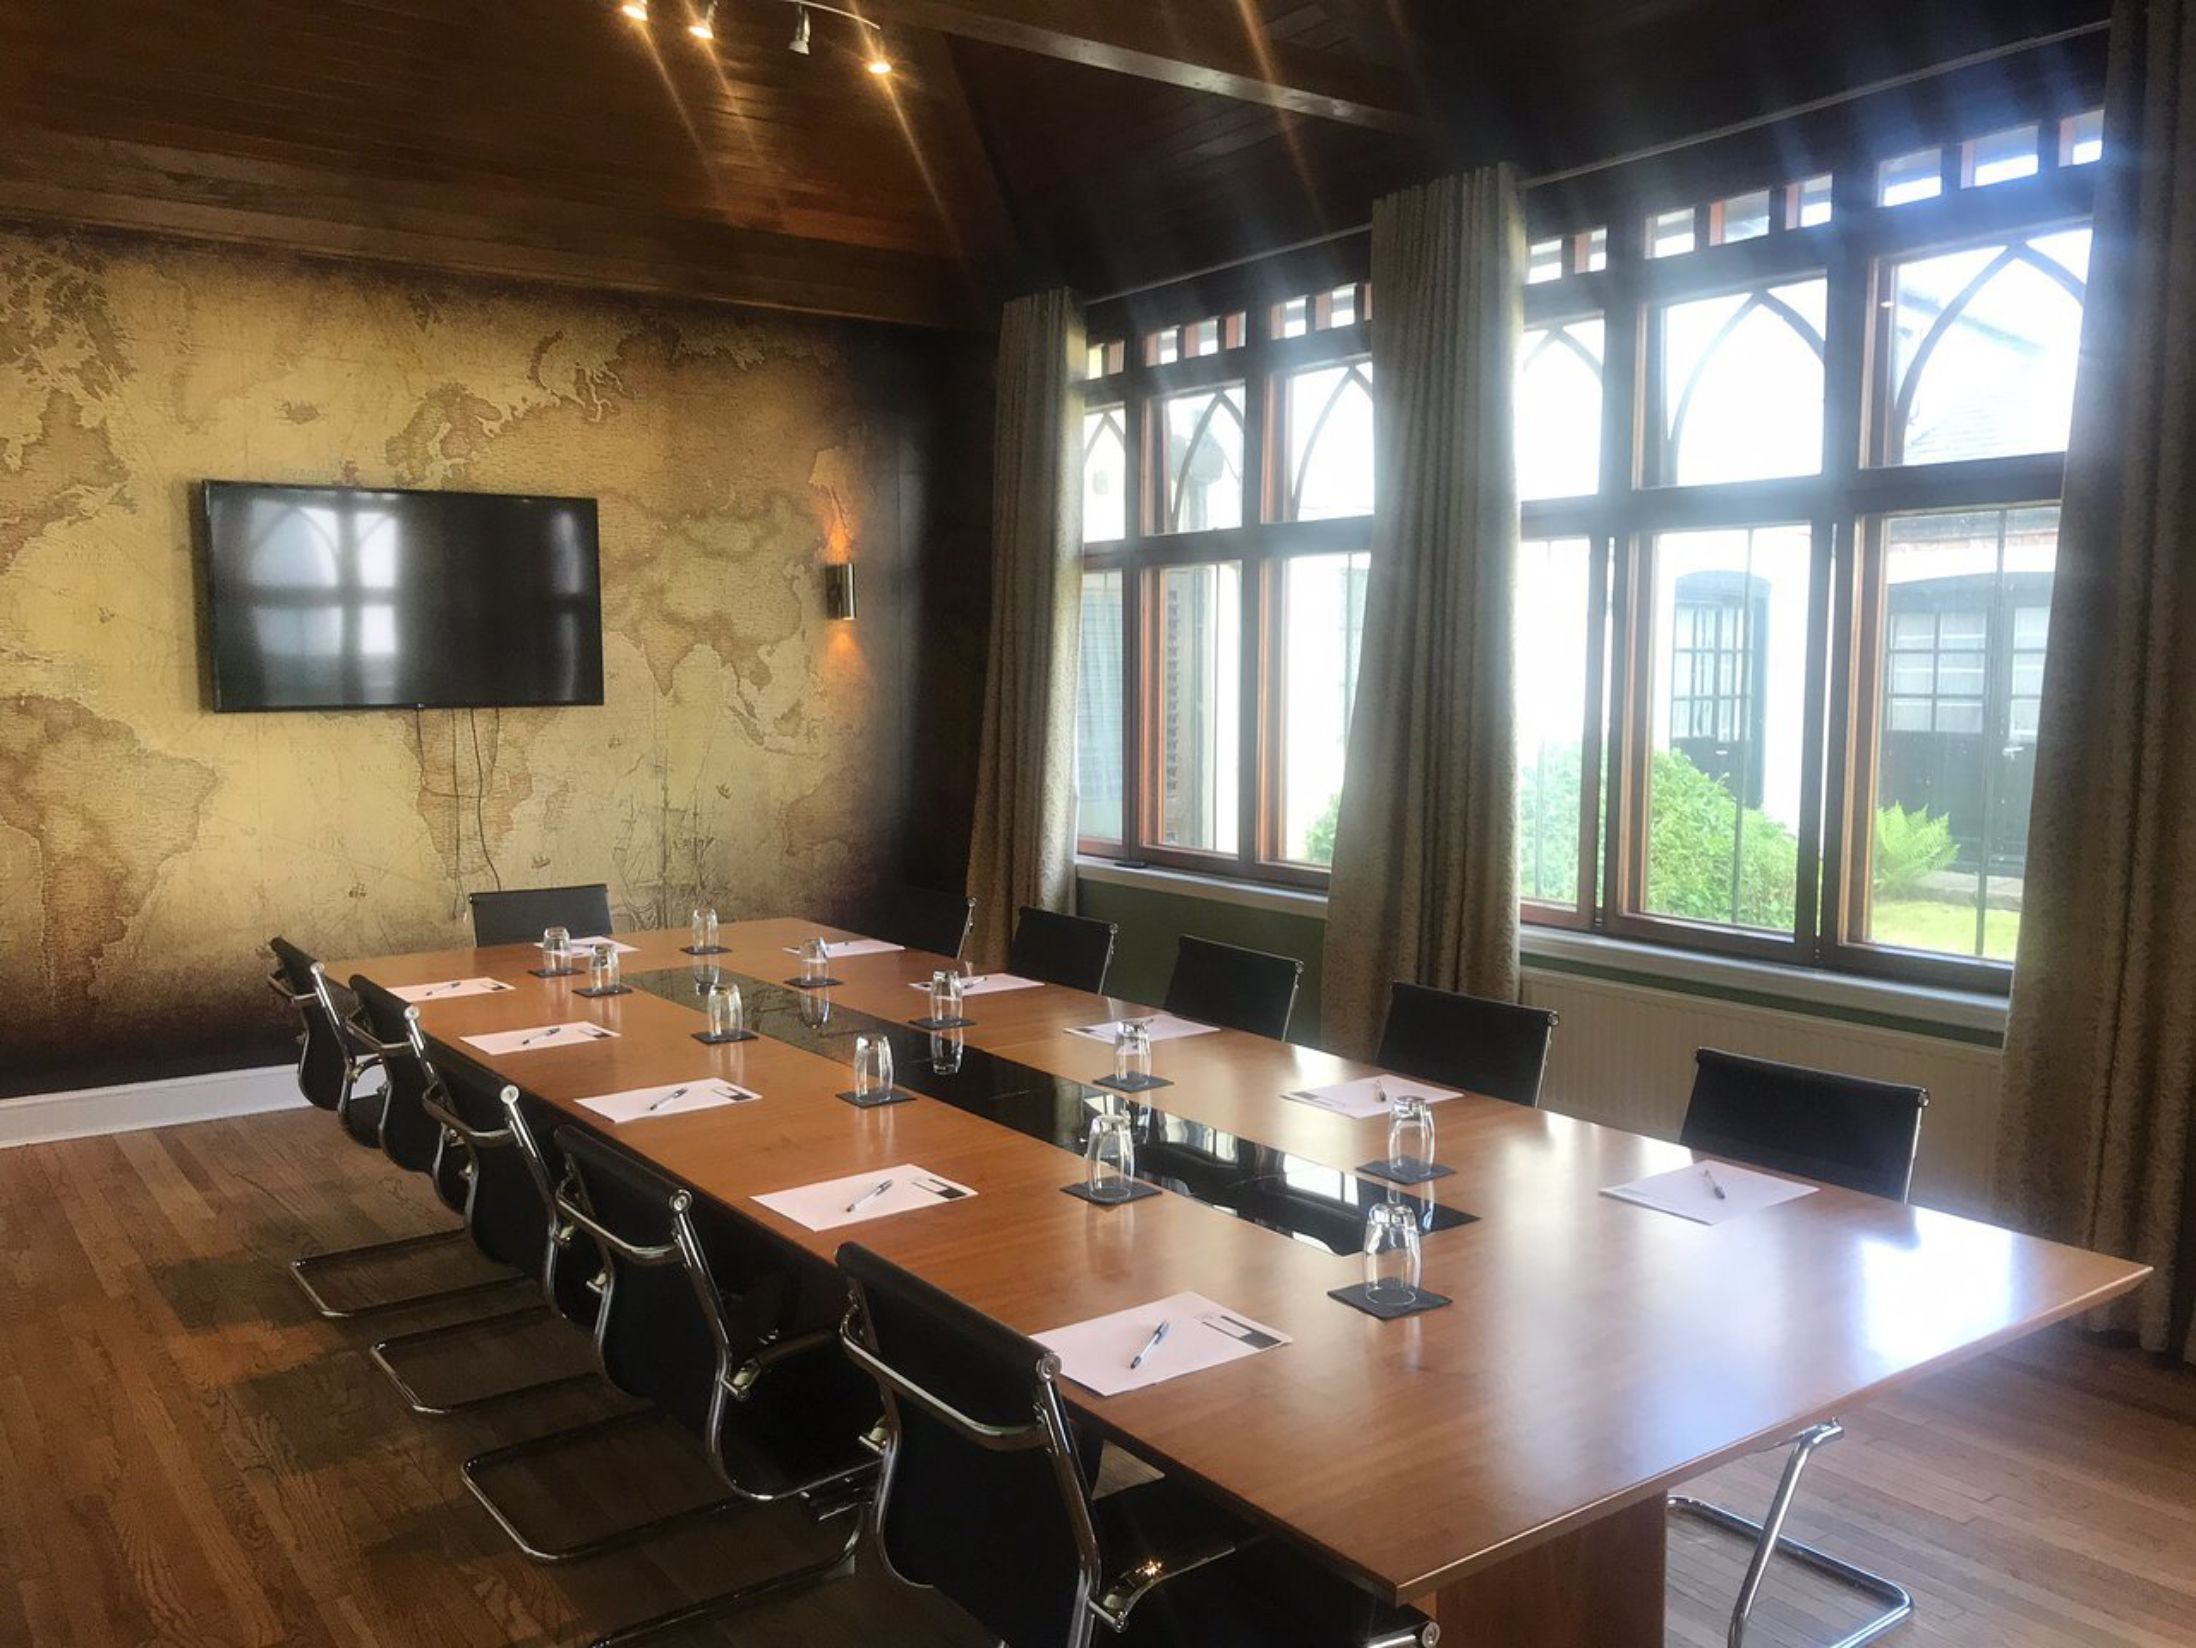 Great Meeting Rooms in Chester - Crabwall Manor Hotel